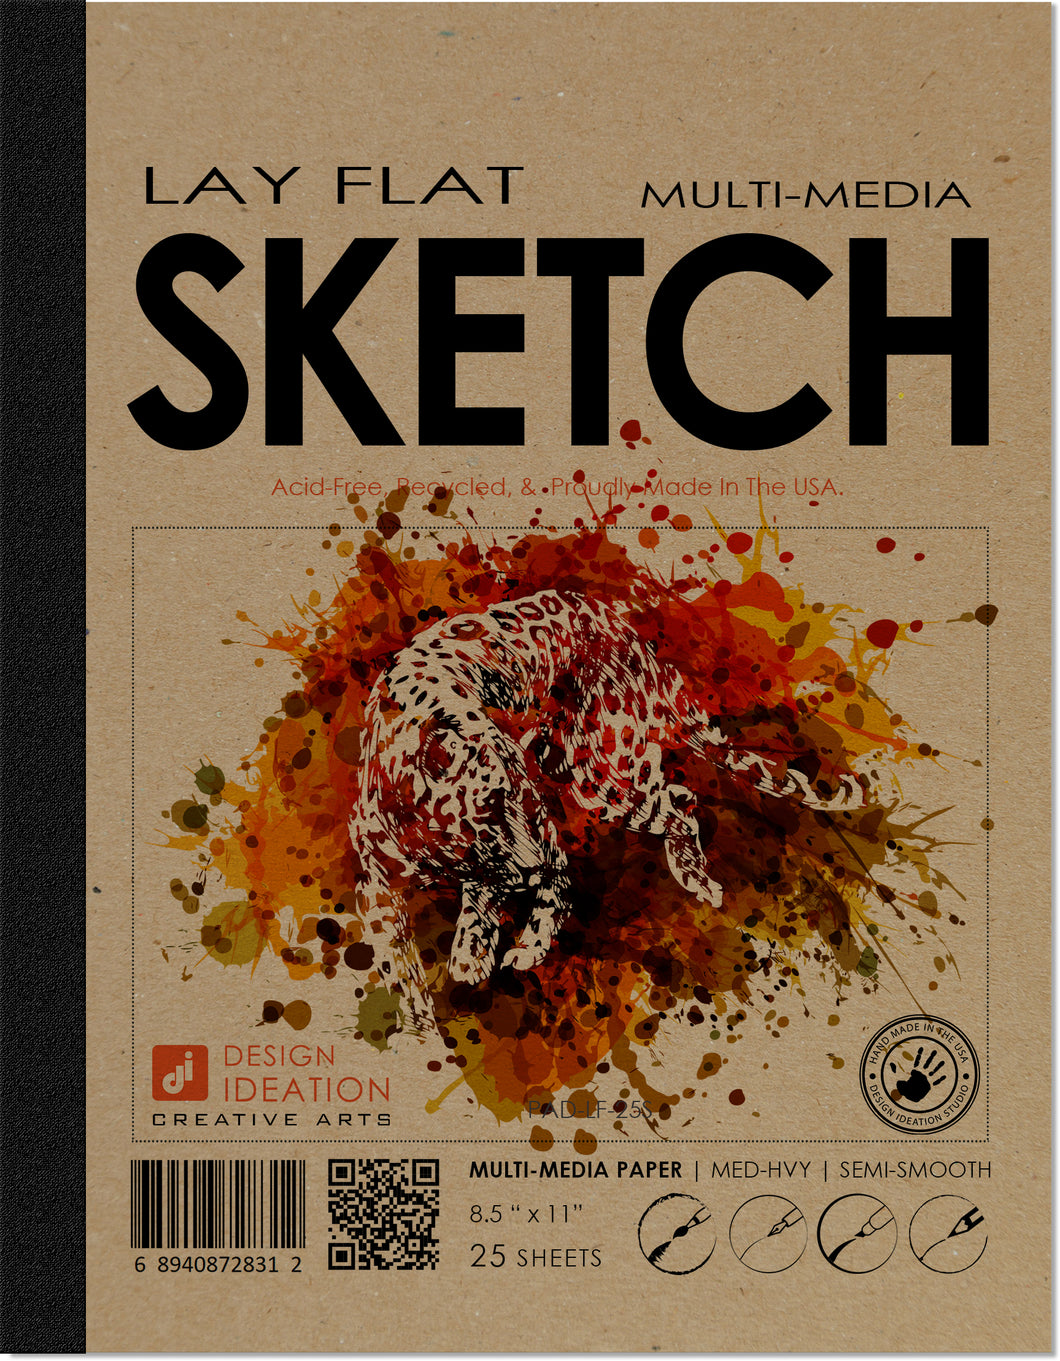 LAY FLAT sketchbook. Removable sheet, journal style SKETCH book. Multi-media. (8.5